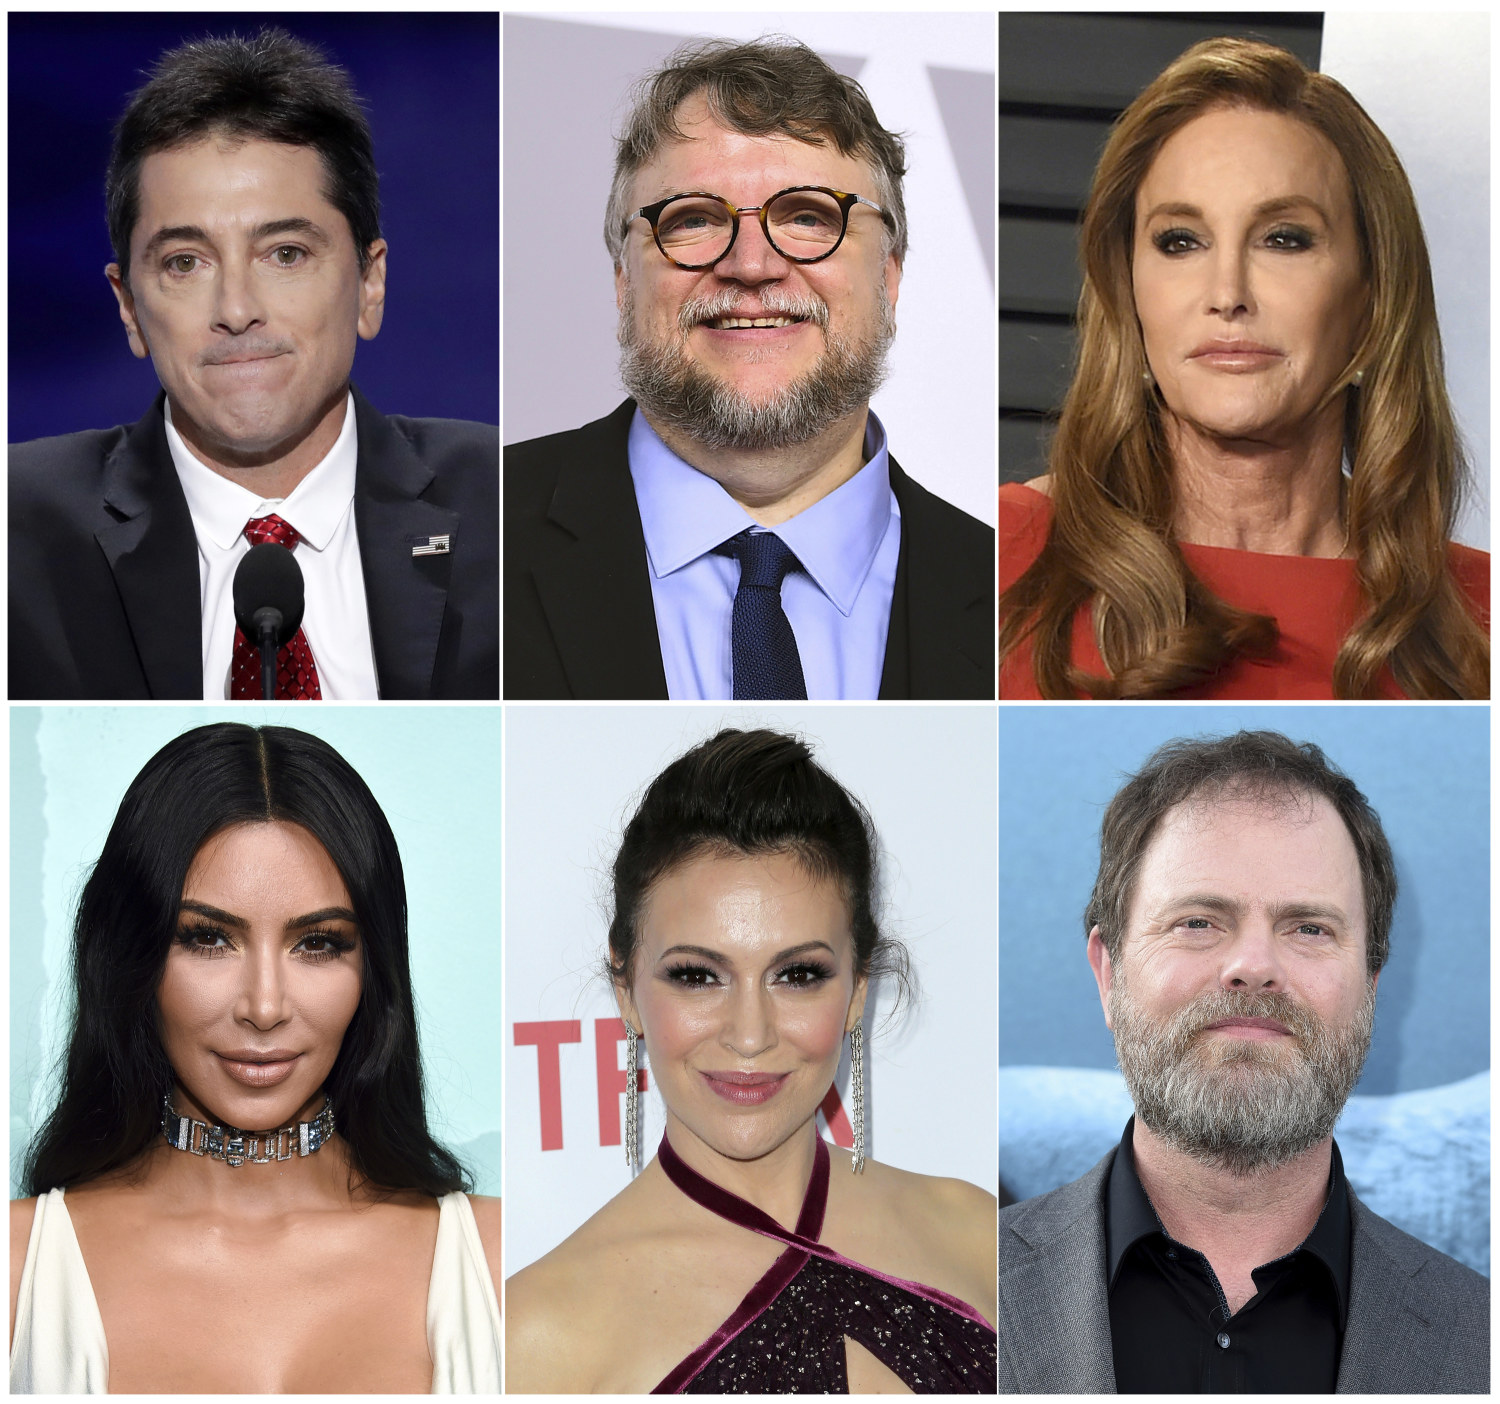 Entertainment, California, wildfires, Malibu, Lady Gaga, Martin Sheen, Kim Kardashian This combination photo shows celebrities, top row from left, Scott Baio, Guillermo del Toro, Caitlyn Jenner and bottom row from left, Kim Kardashian, Alyssa Milano and Rainn Wilson, who have been forced to evacuate their homes due to a fast-moving wildfire in Southern California